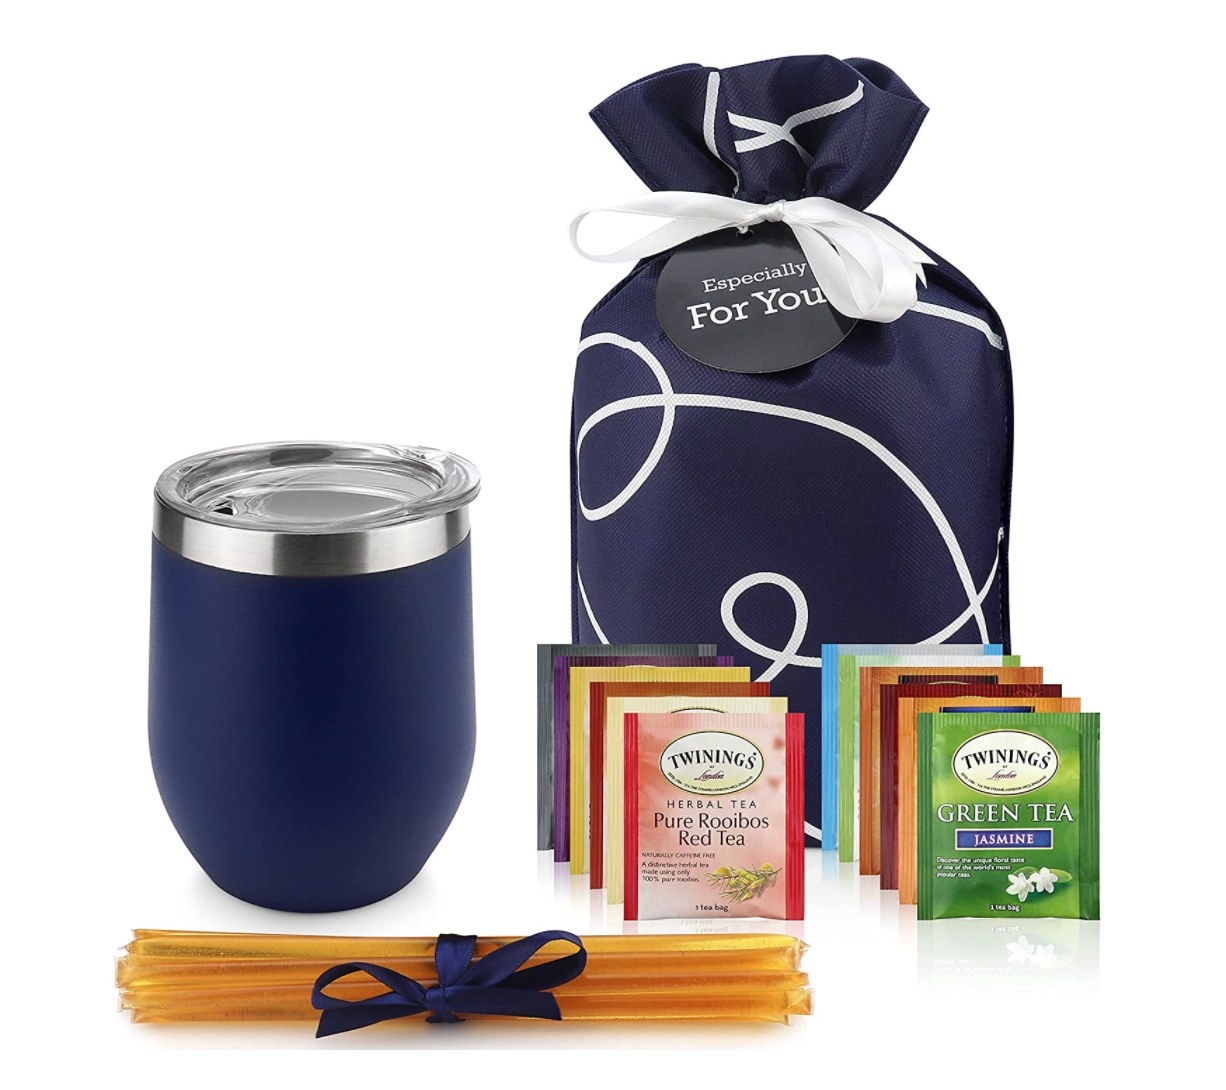 the full set with the honey sticks, mug, tea packets, and gift bag